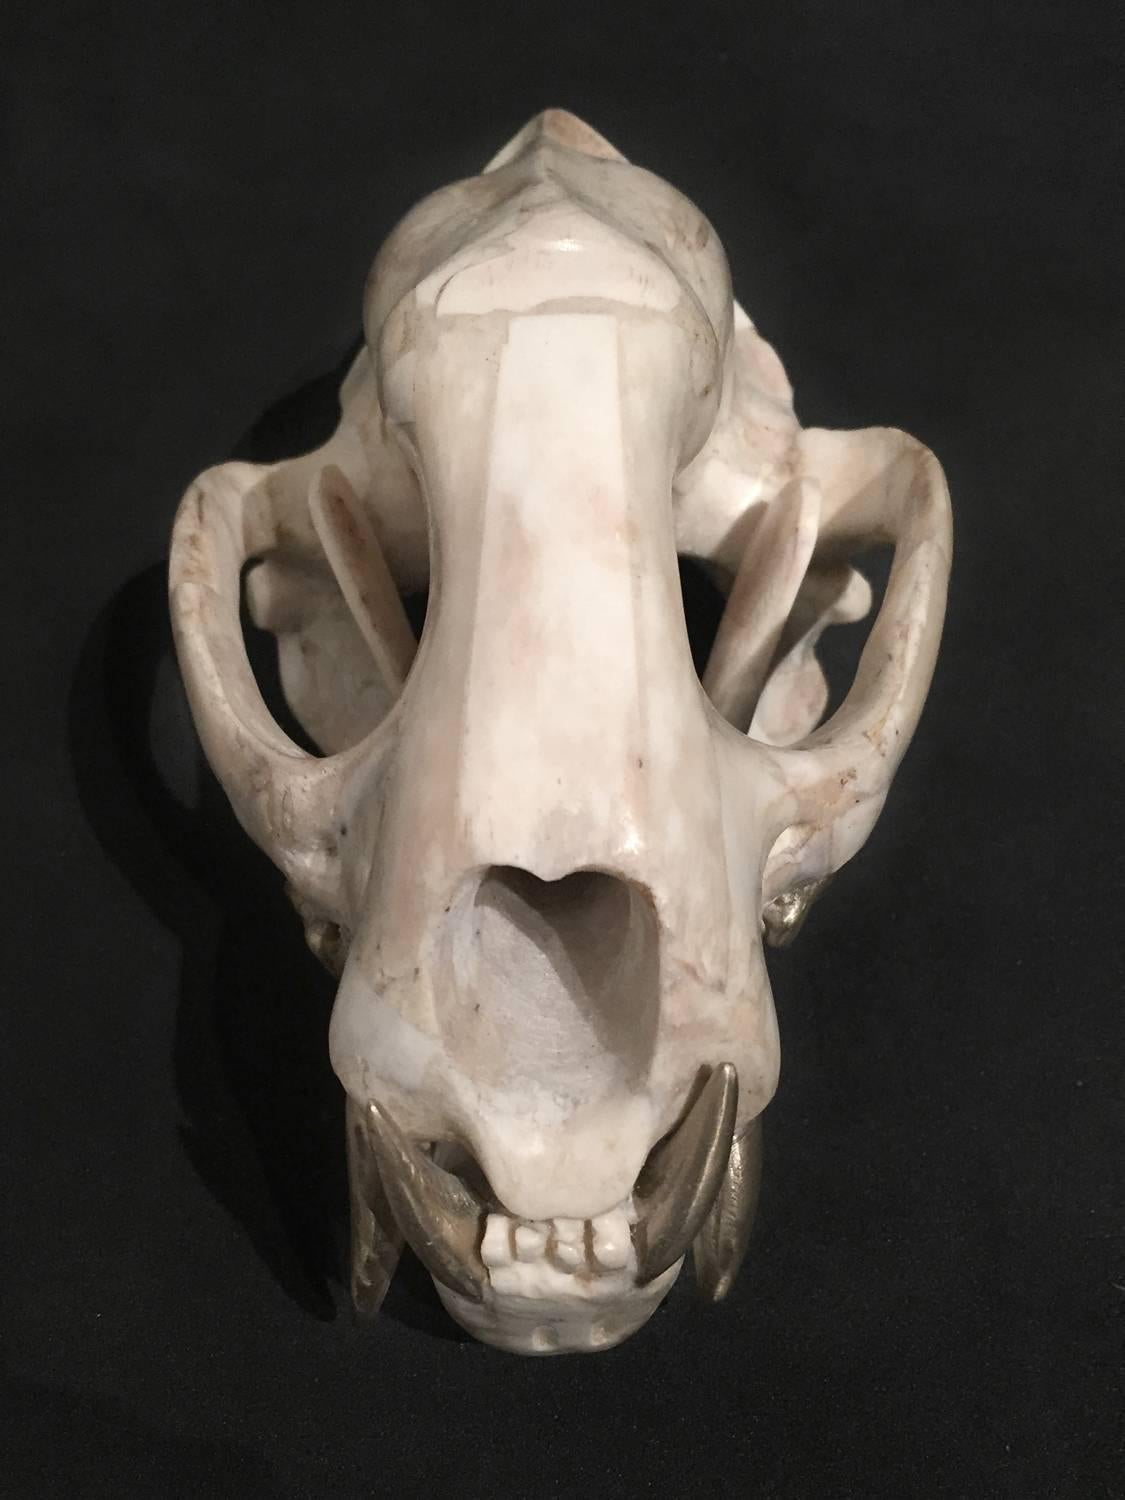 Material: Bone (Water Buffalo), Brass.

Dimension:
12.7 DIA x 24.25 L cm
5 DIA x 9.5 L in

Production Date: 2015

Edition of 10. Hand-carved. Piece unique.